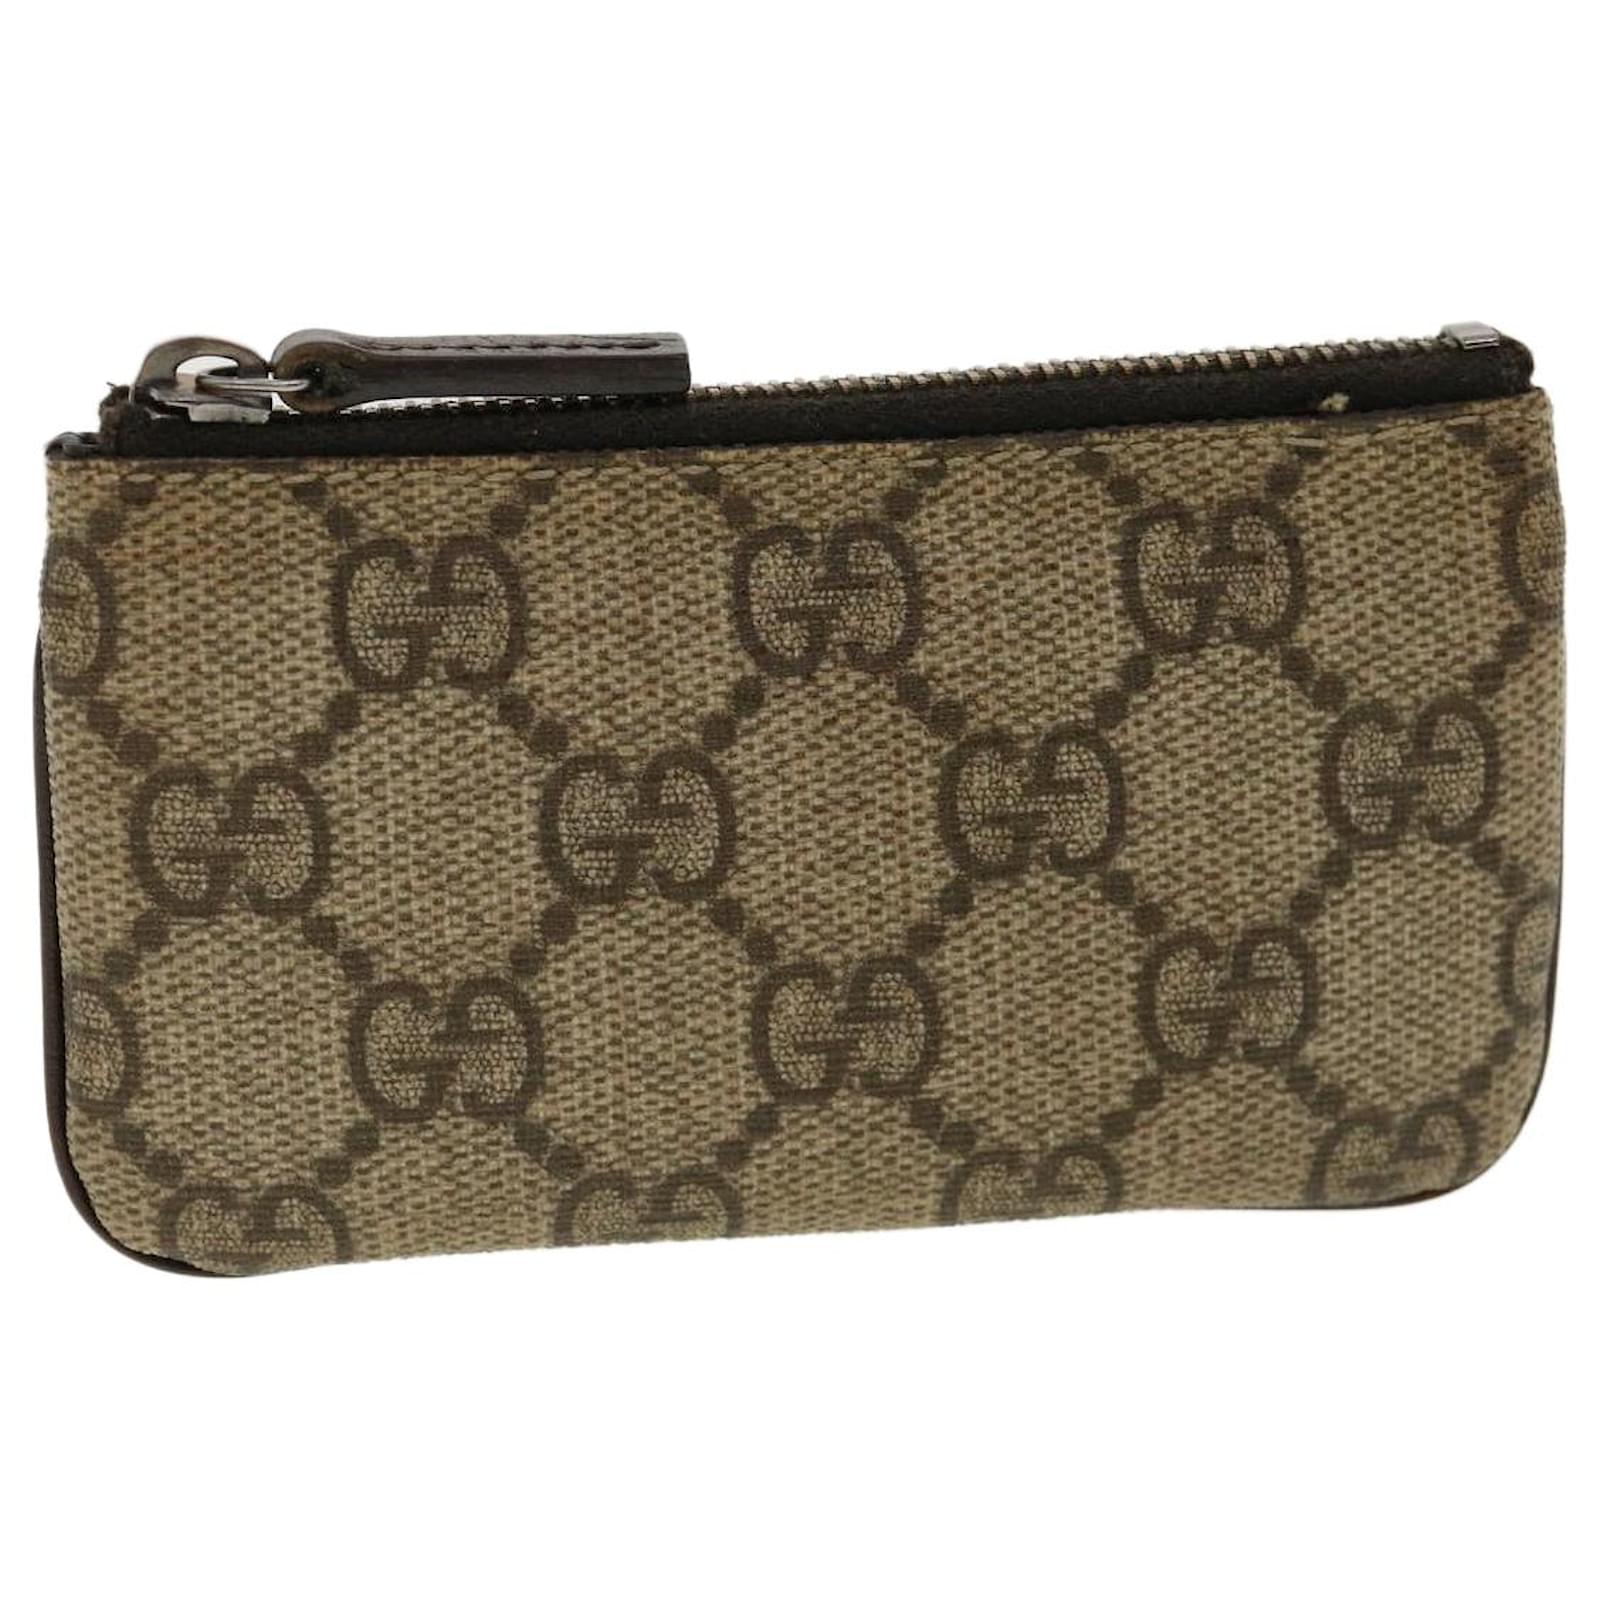 Ophidia GG key pouch in Beige Guccissima Leather | GUCCI® SI